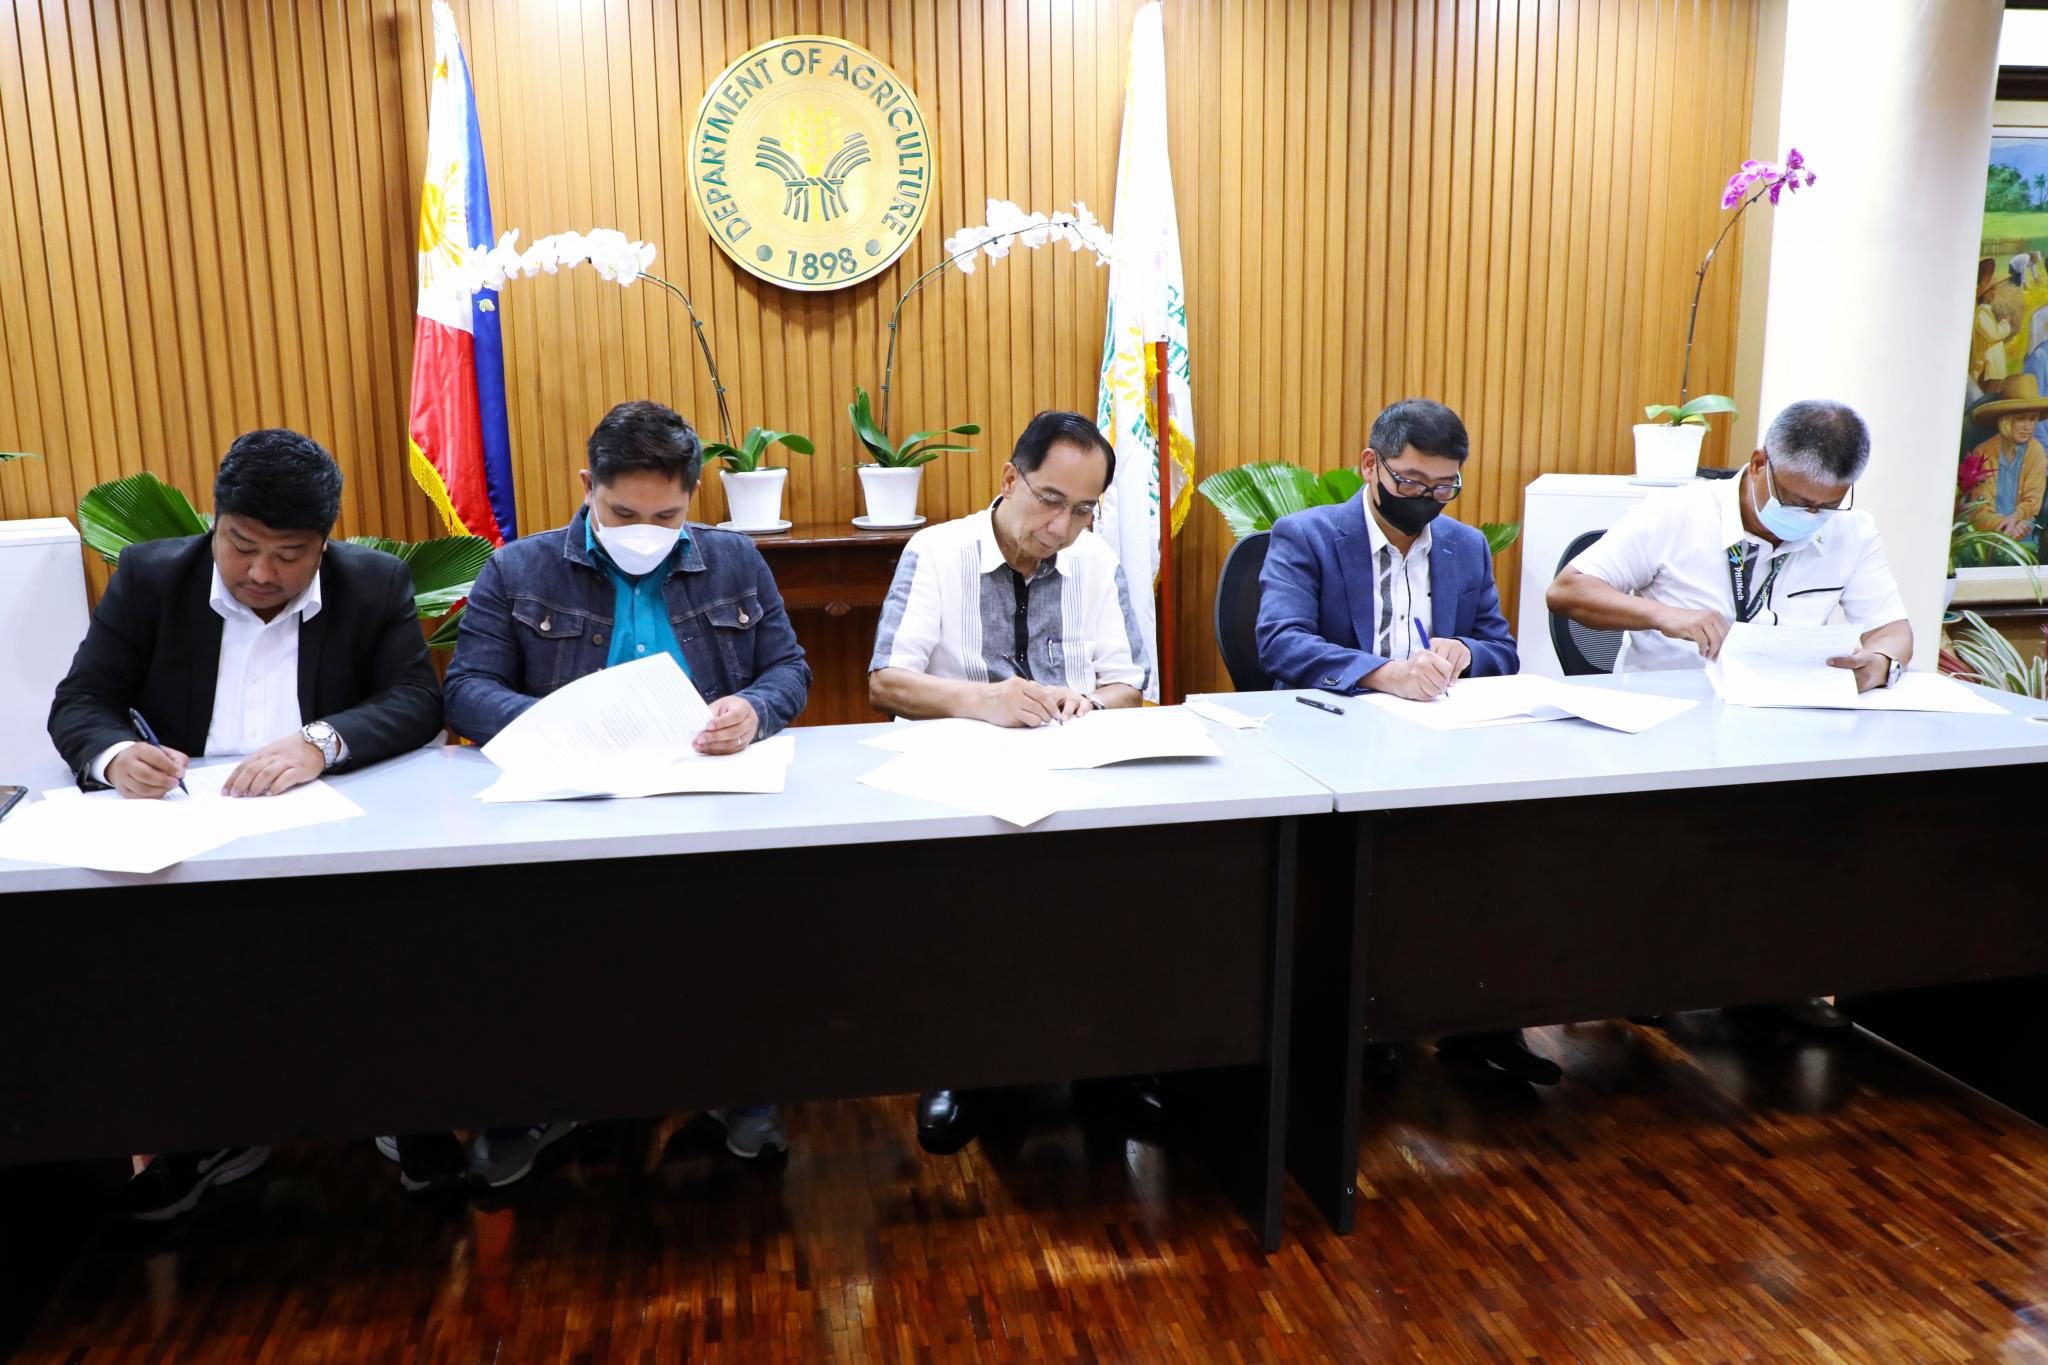 Quezon rice farmers to benefit from “We Will Rice Program” in newly-signed MOU